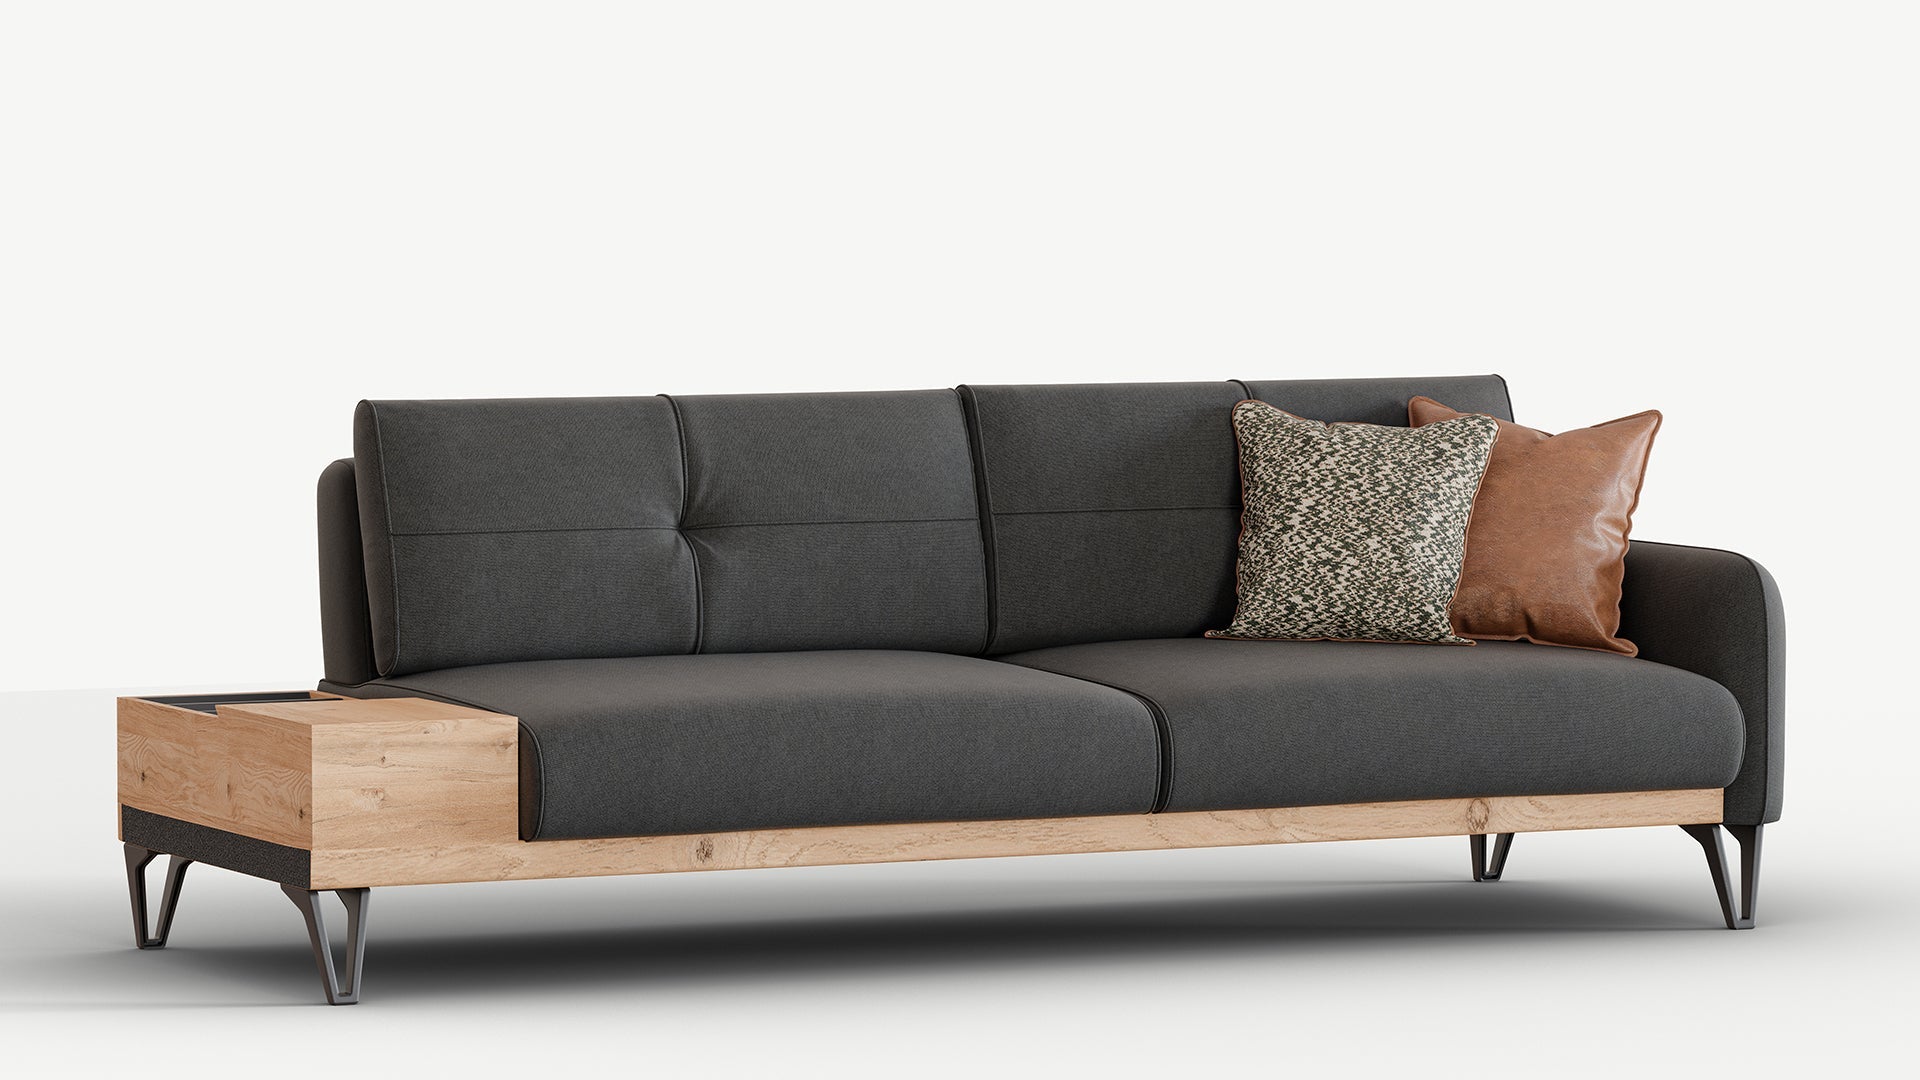 Solid 3 Seater Sofa With Coffee Table - Left